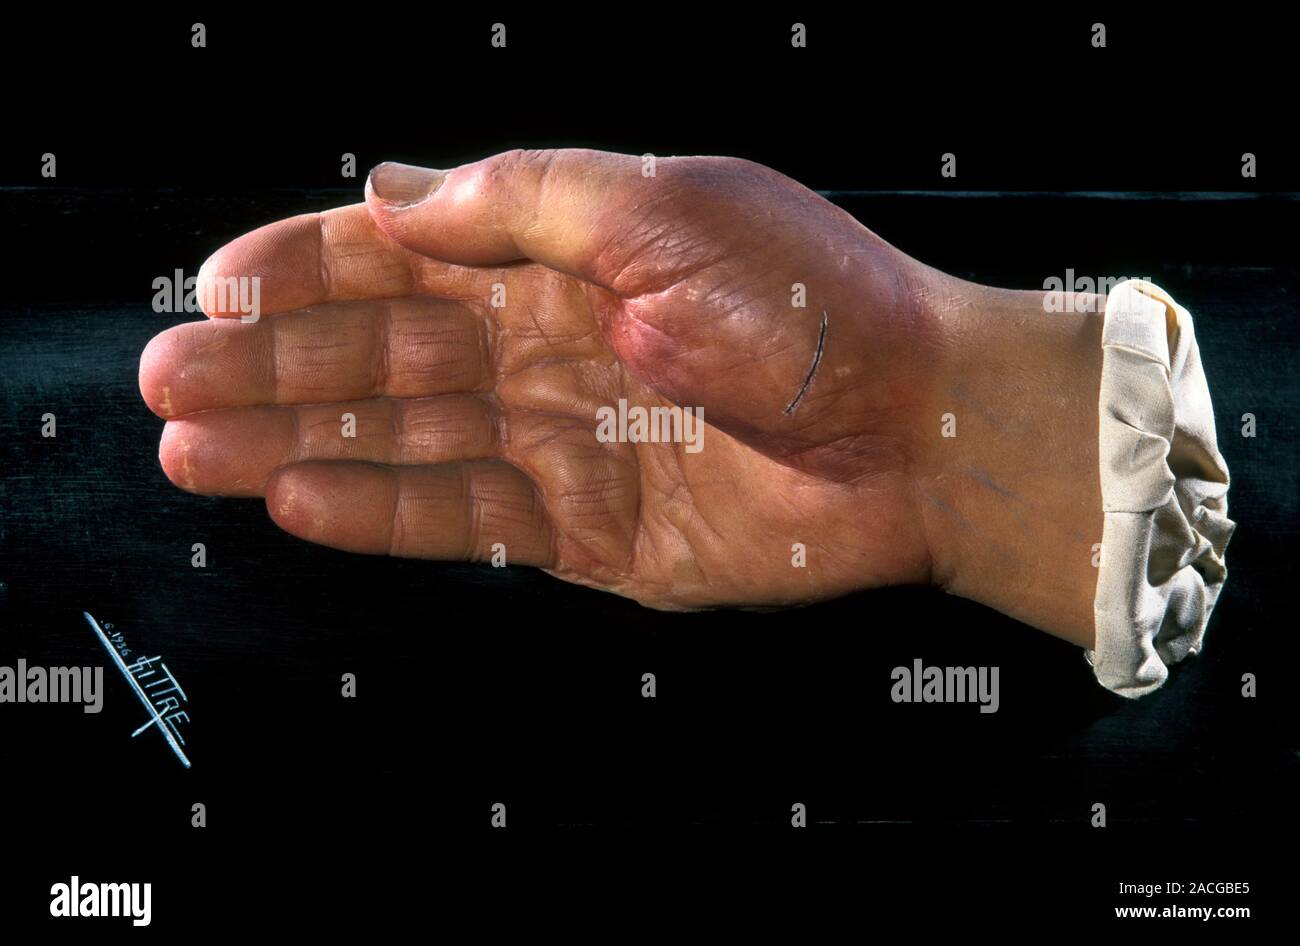 Erysipeloid skin infection model. Wax model of a human hand showing the redness and oedema (swelling) caused by an erysipeloid (Erythema serpens) infe Stock Photo